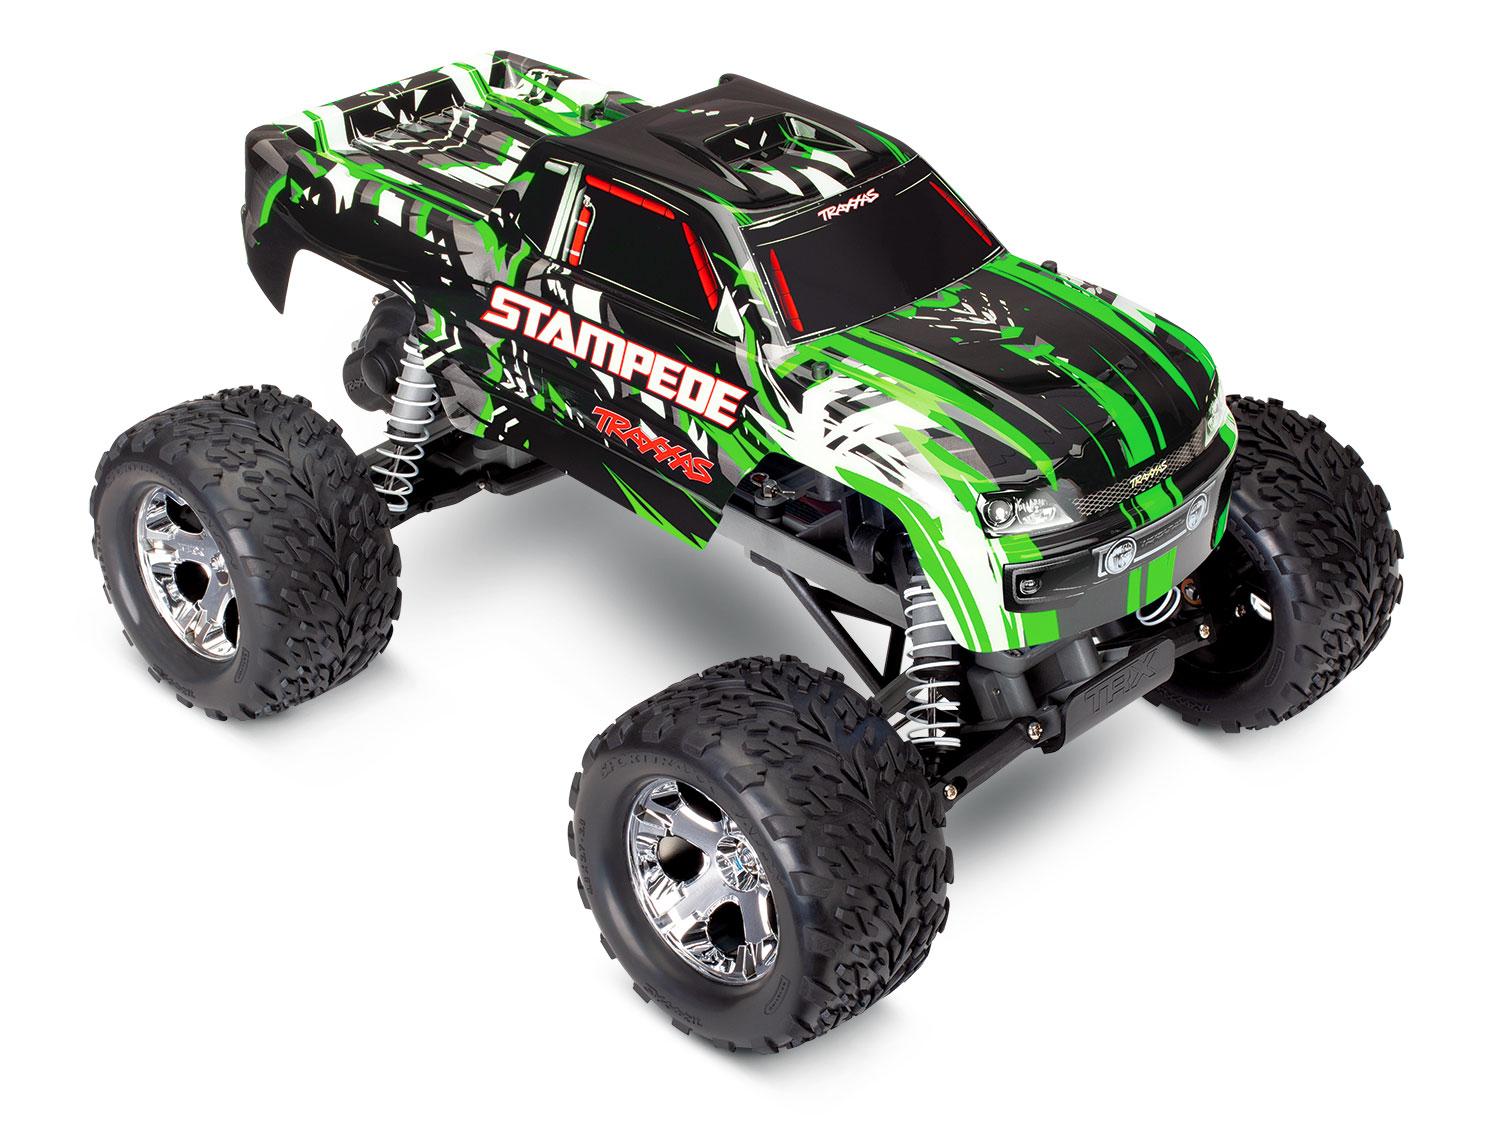 Top 10 Electric Rc Cars:  Top 10 Electric RC Cars for Every Type of Enthusiast